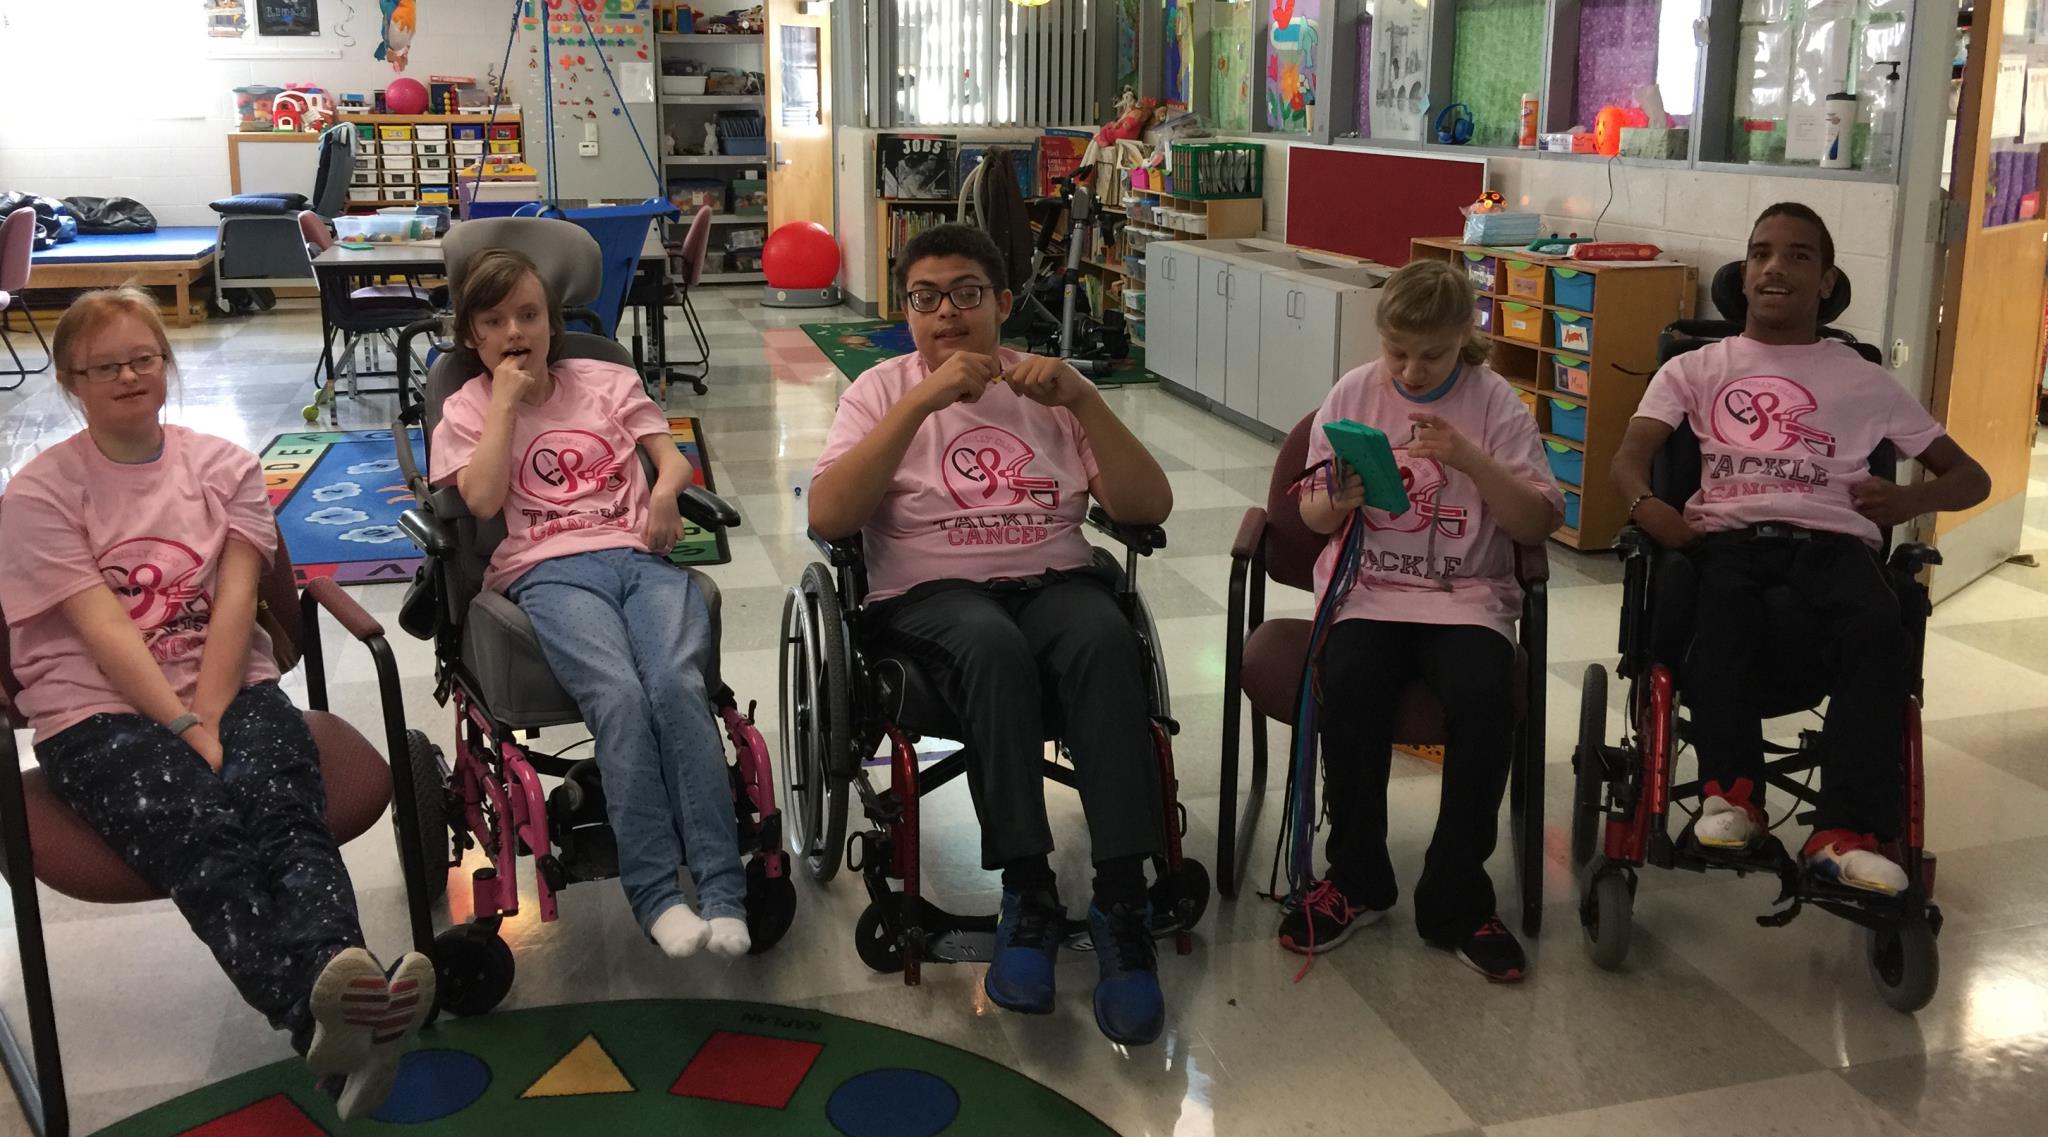 Students in their pink shirts at Karl Richter Campus